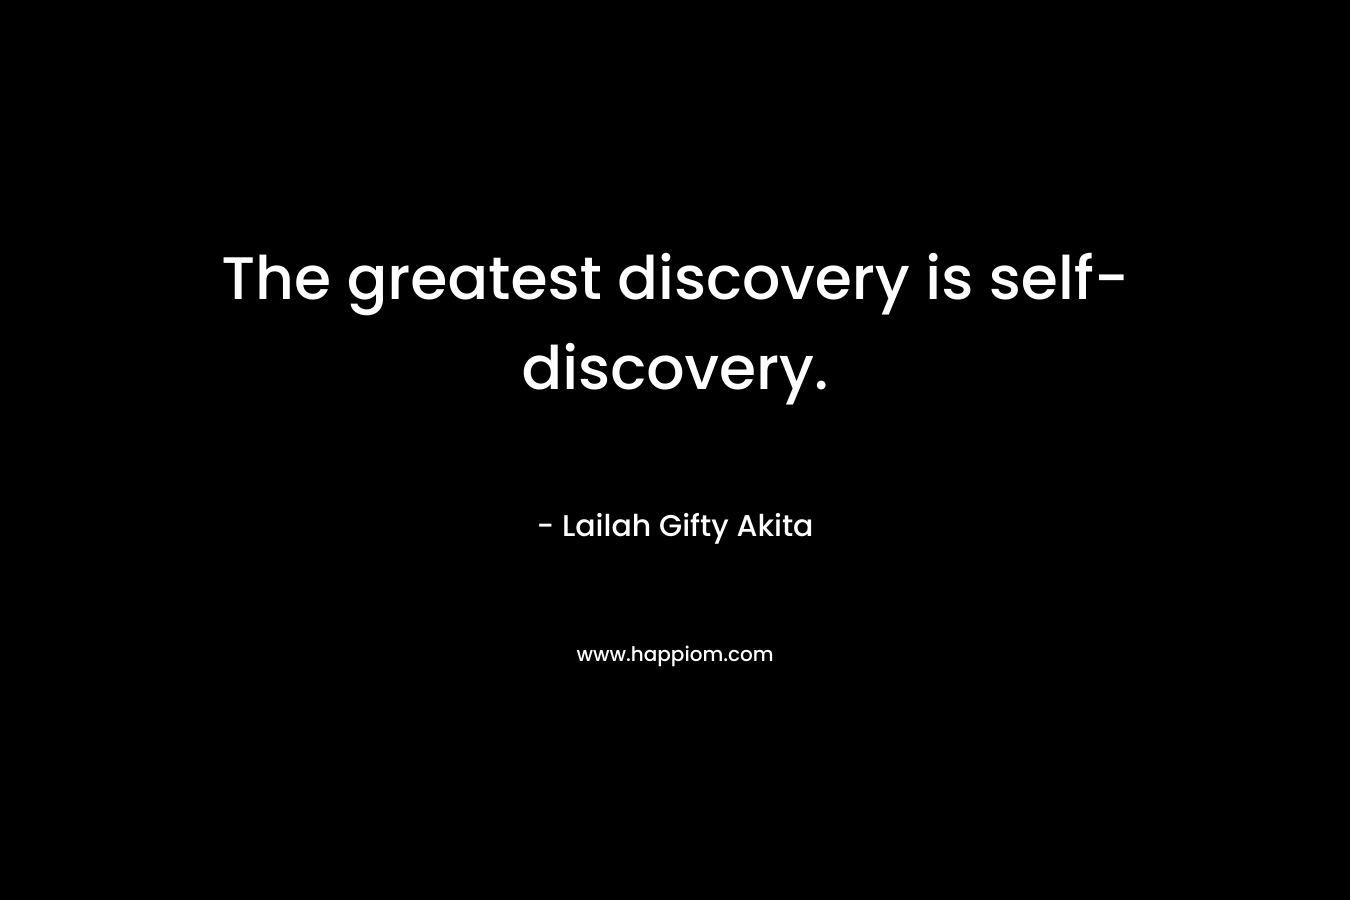 The greatest discovery is self-discovery.